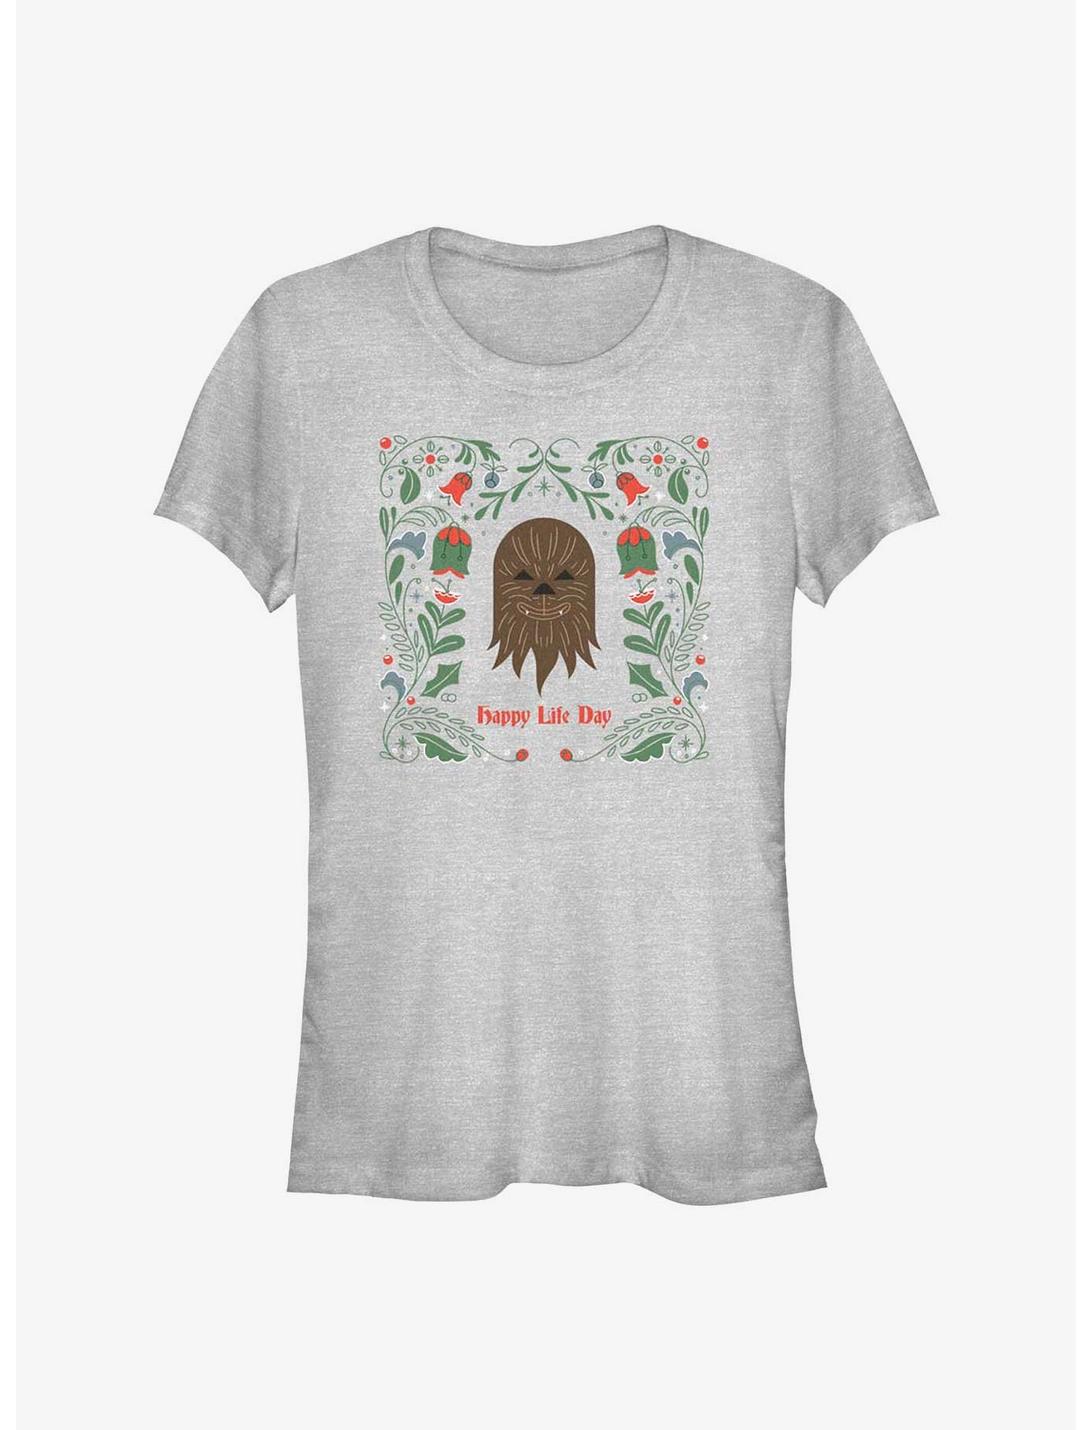 Star Wars Chewie Happy Life Day Girls T-Shirt, ATH HTR, hi-res